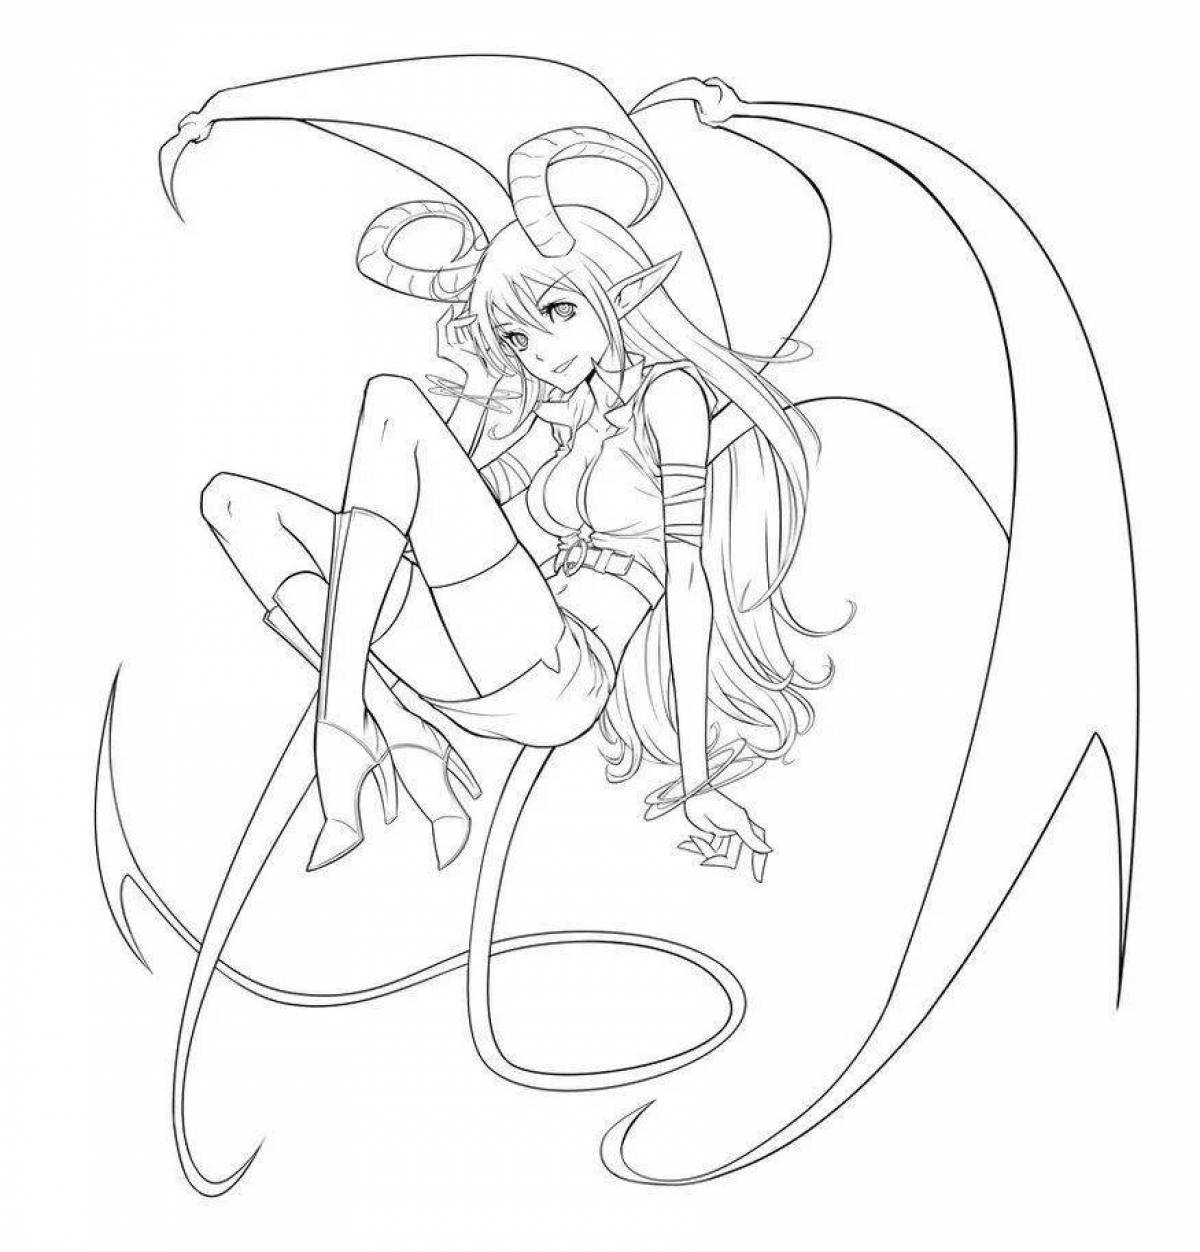 Coloring book ethereal demon girl